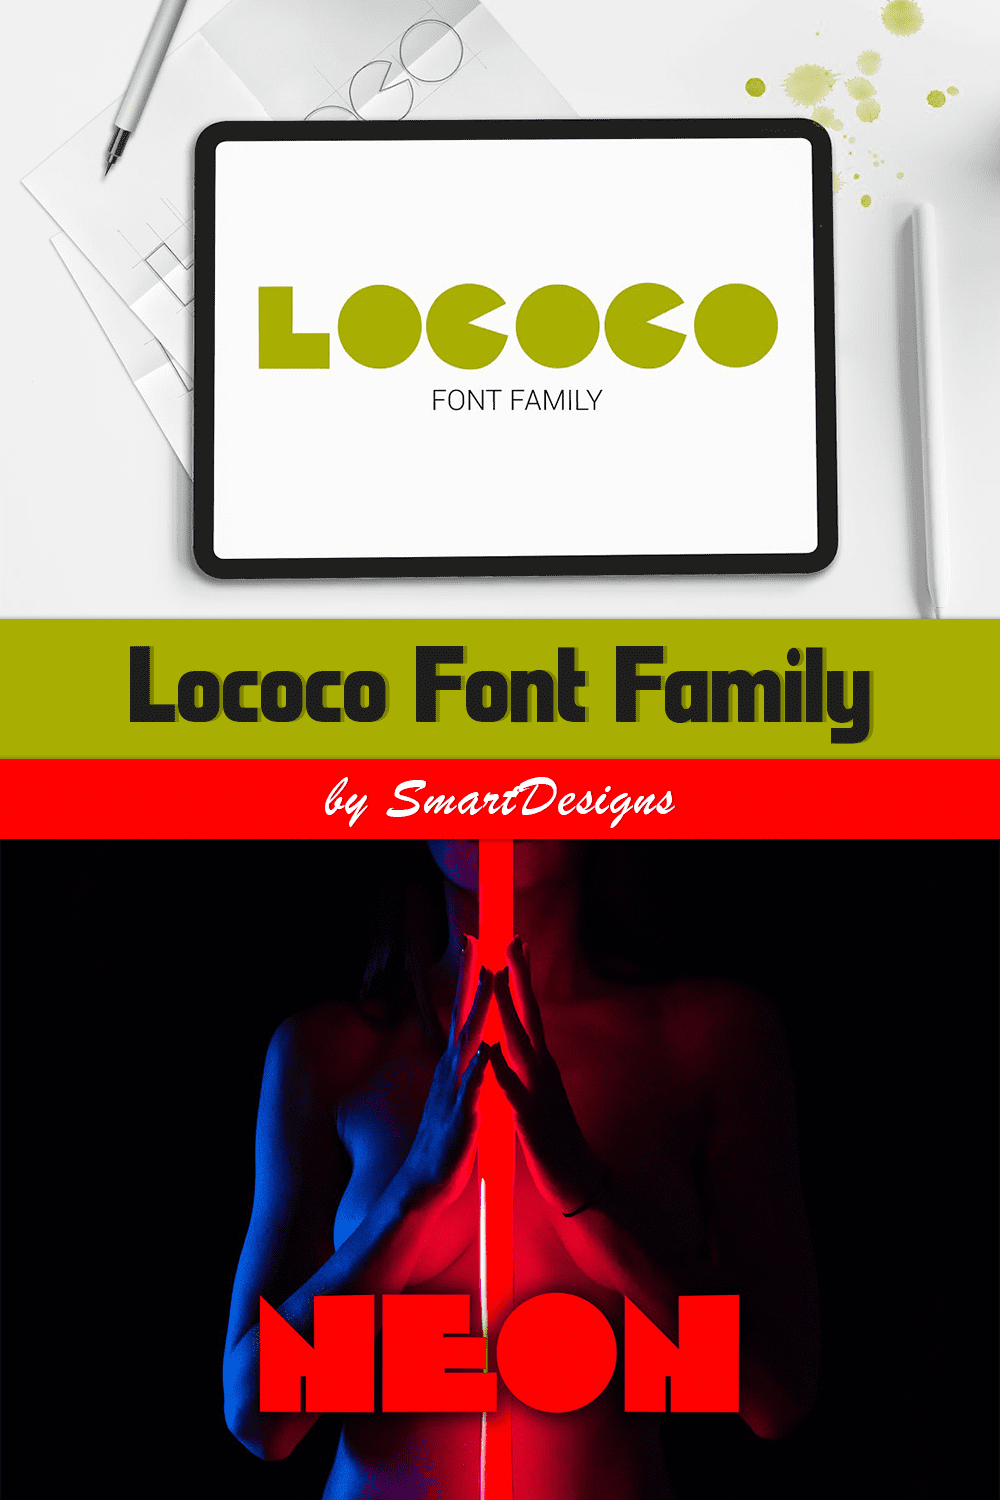 Lococo font family of pinterest.